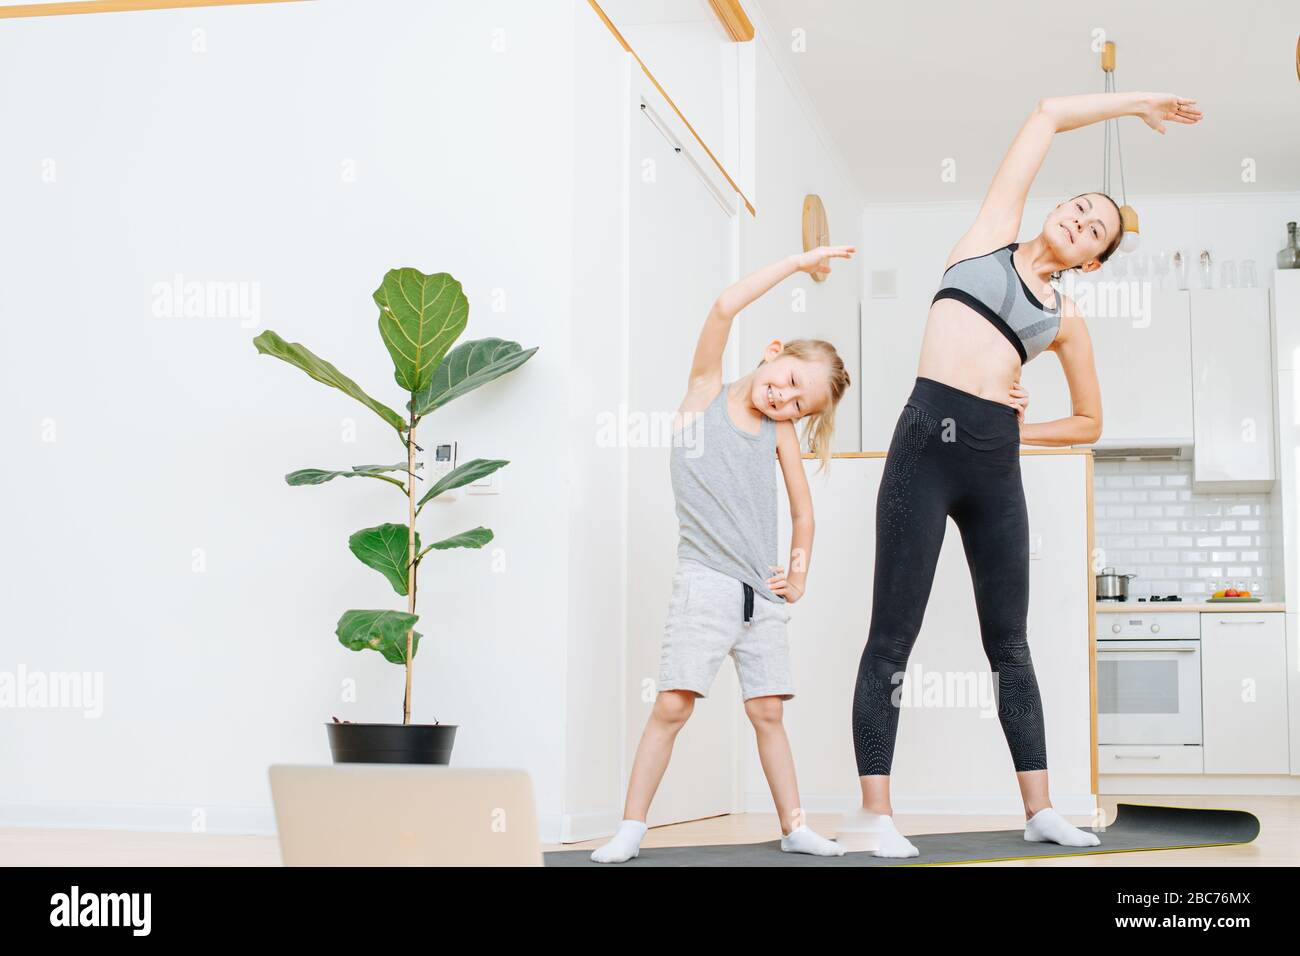 Smiling mother and son doing side bends exercise, keeping fit Stock Photo